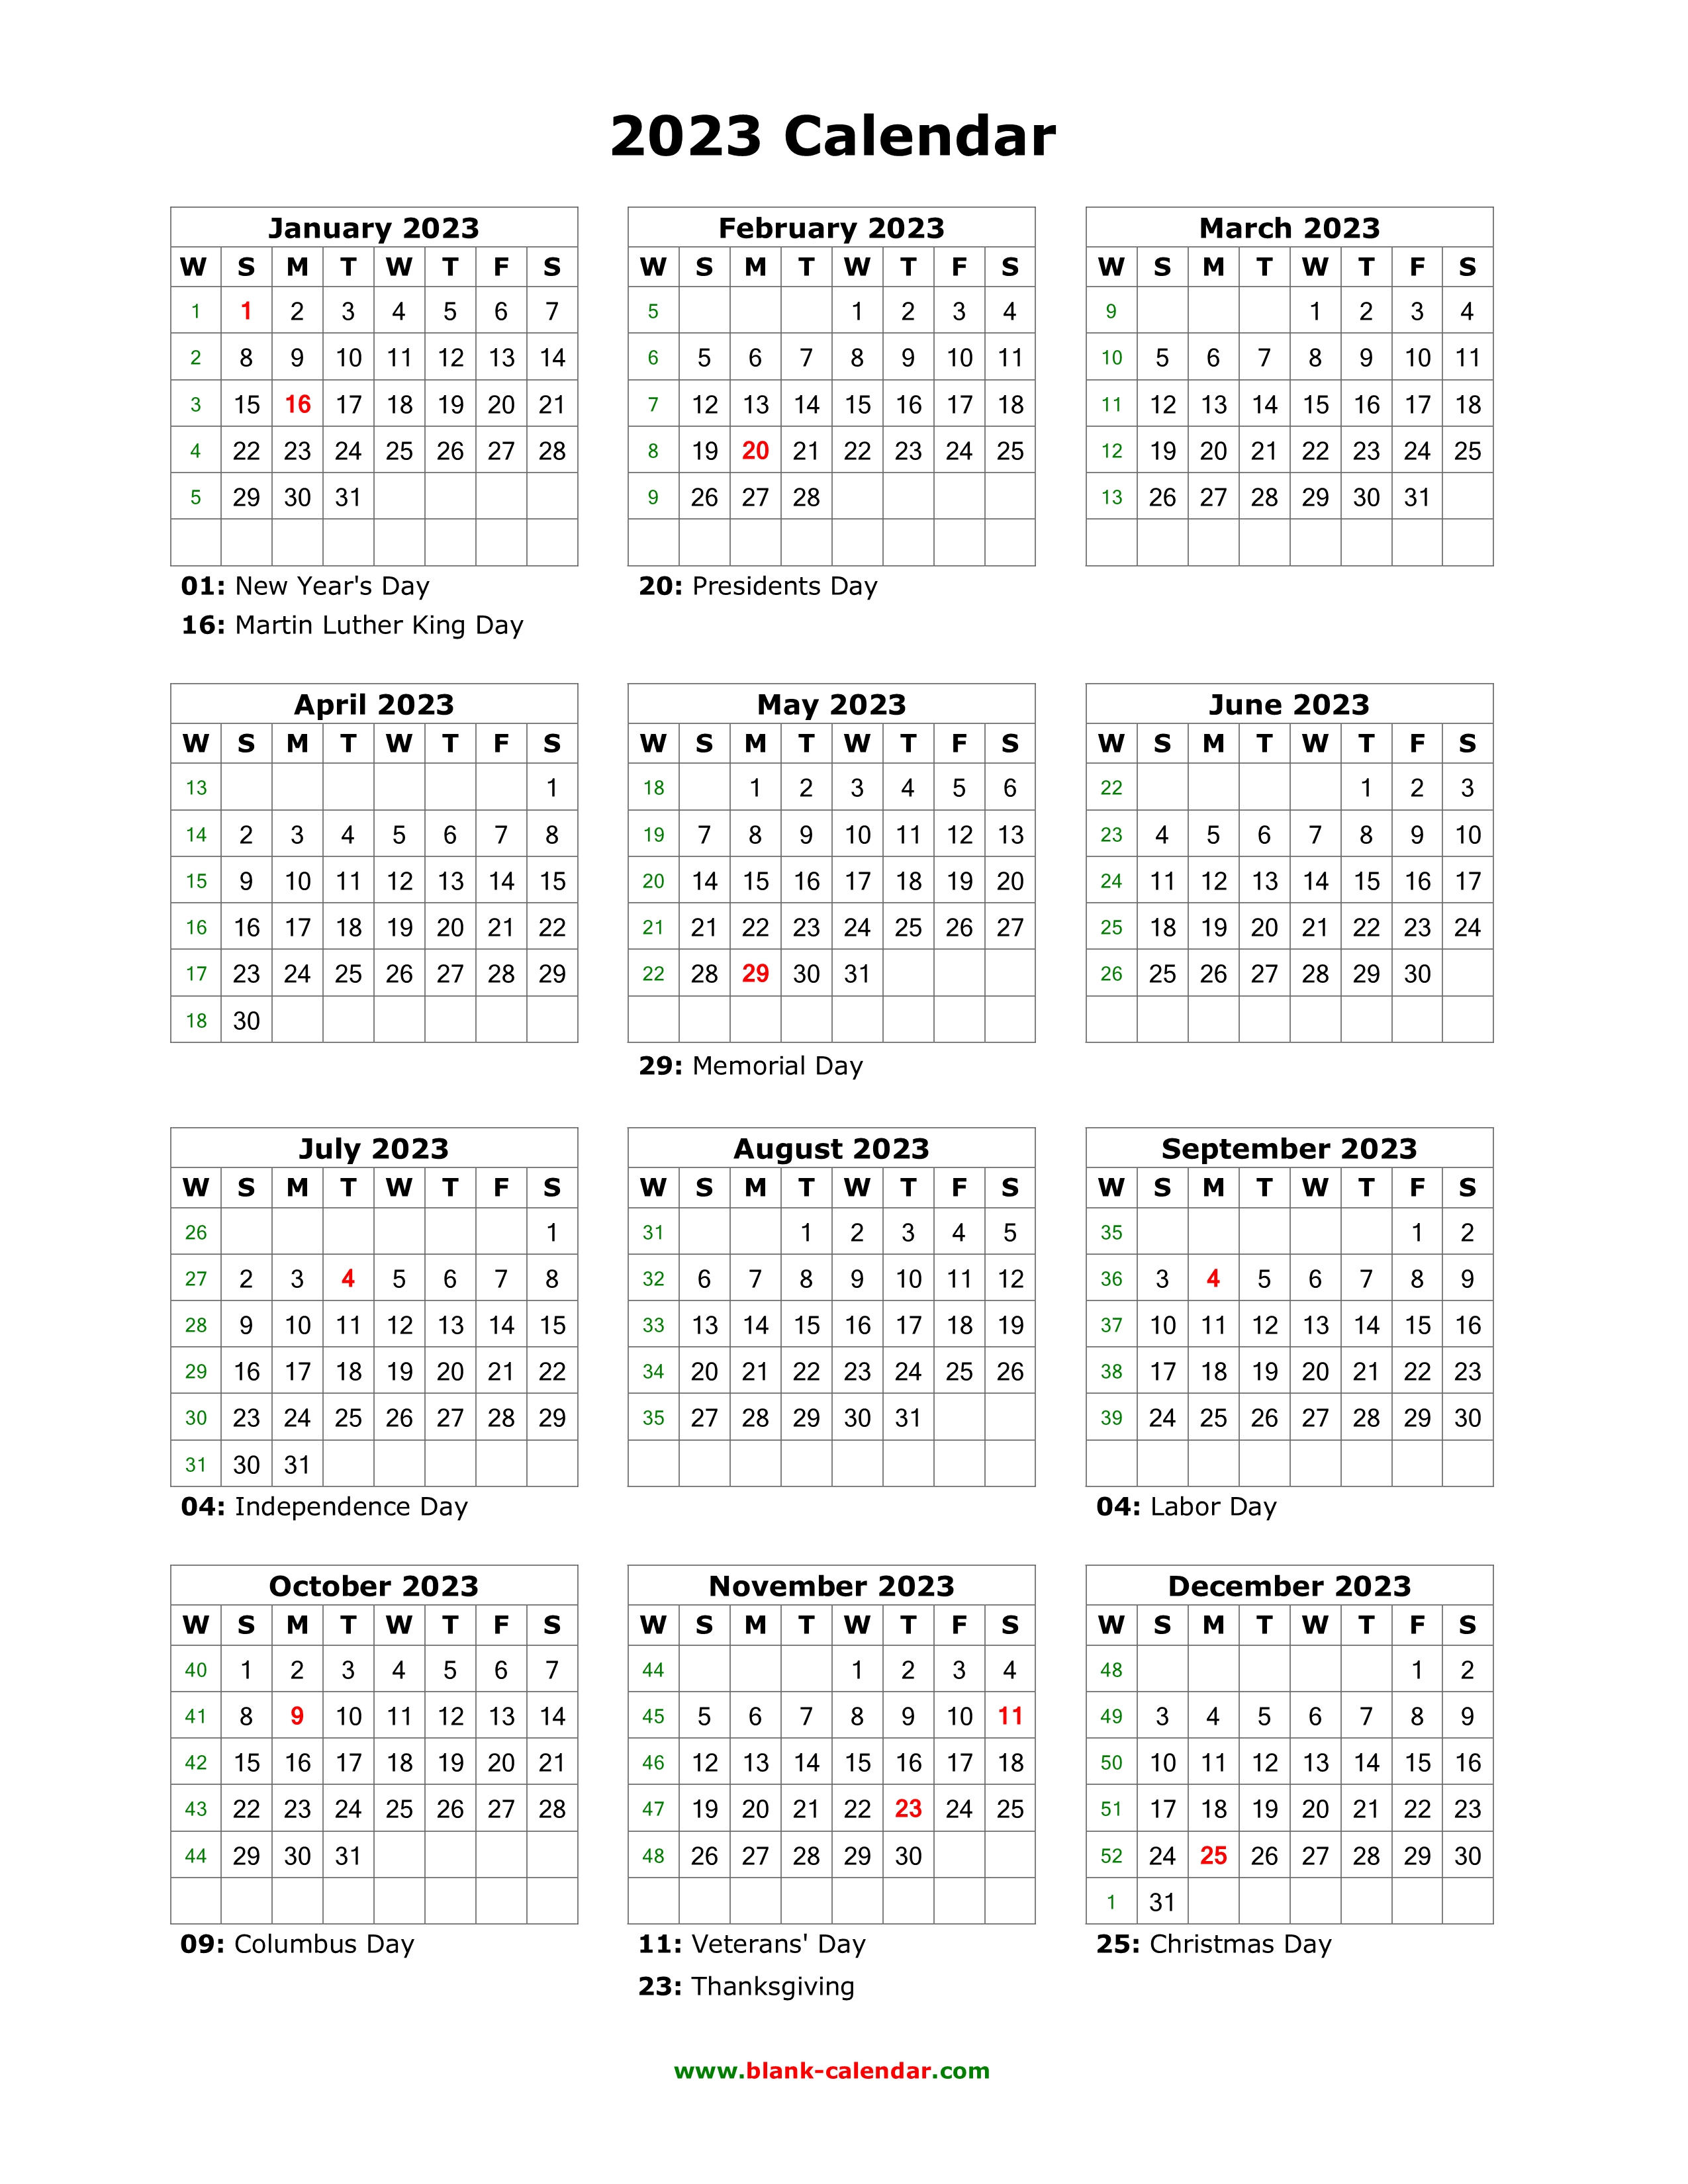 Download Blank Calendar 2023 With Us Holidays 12 Months On One Page Vertical